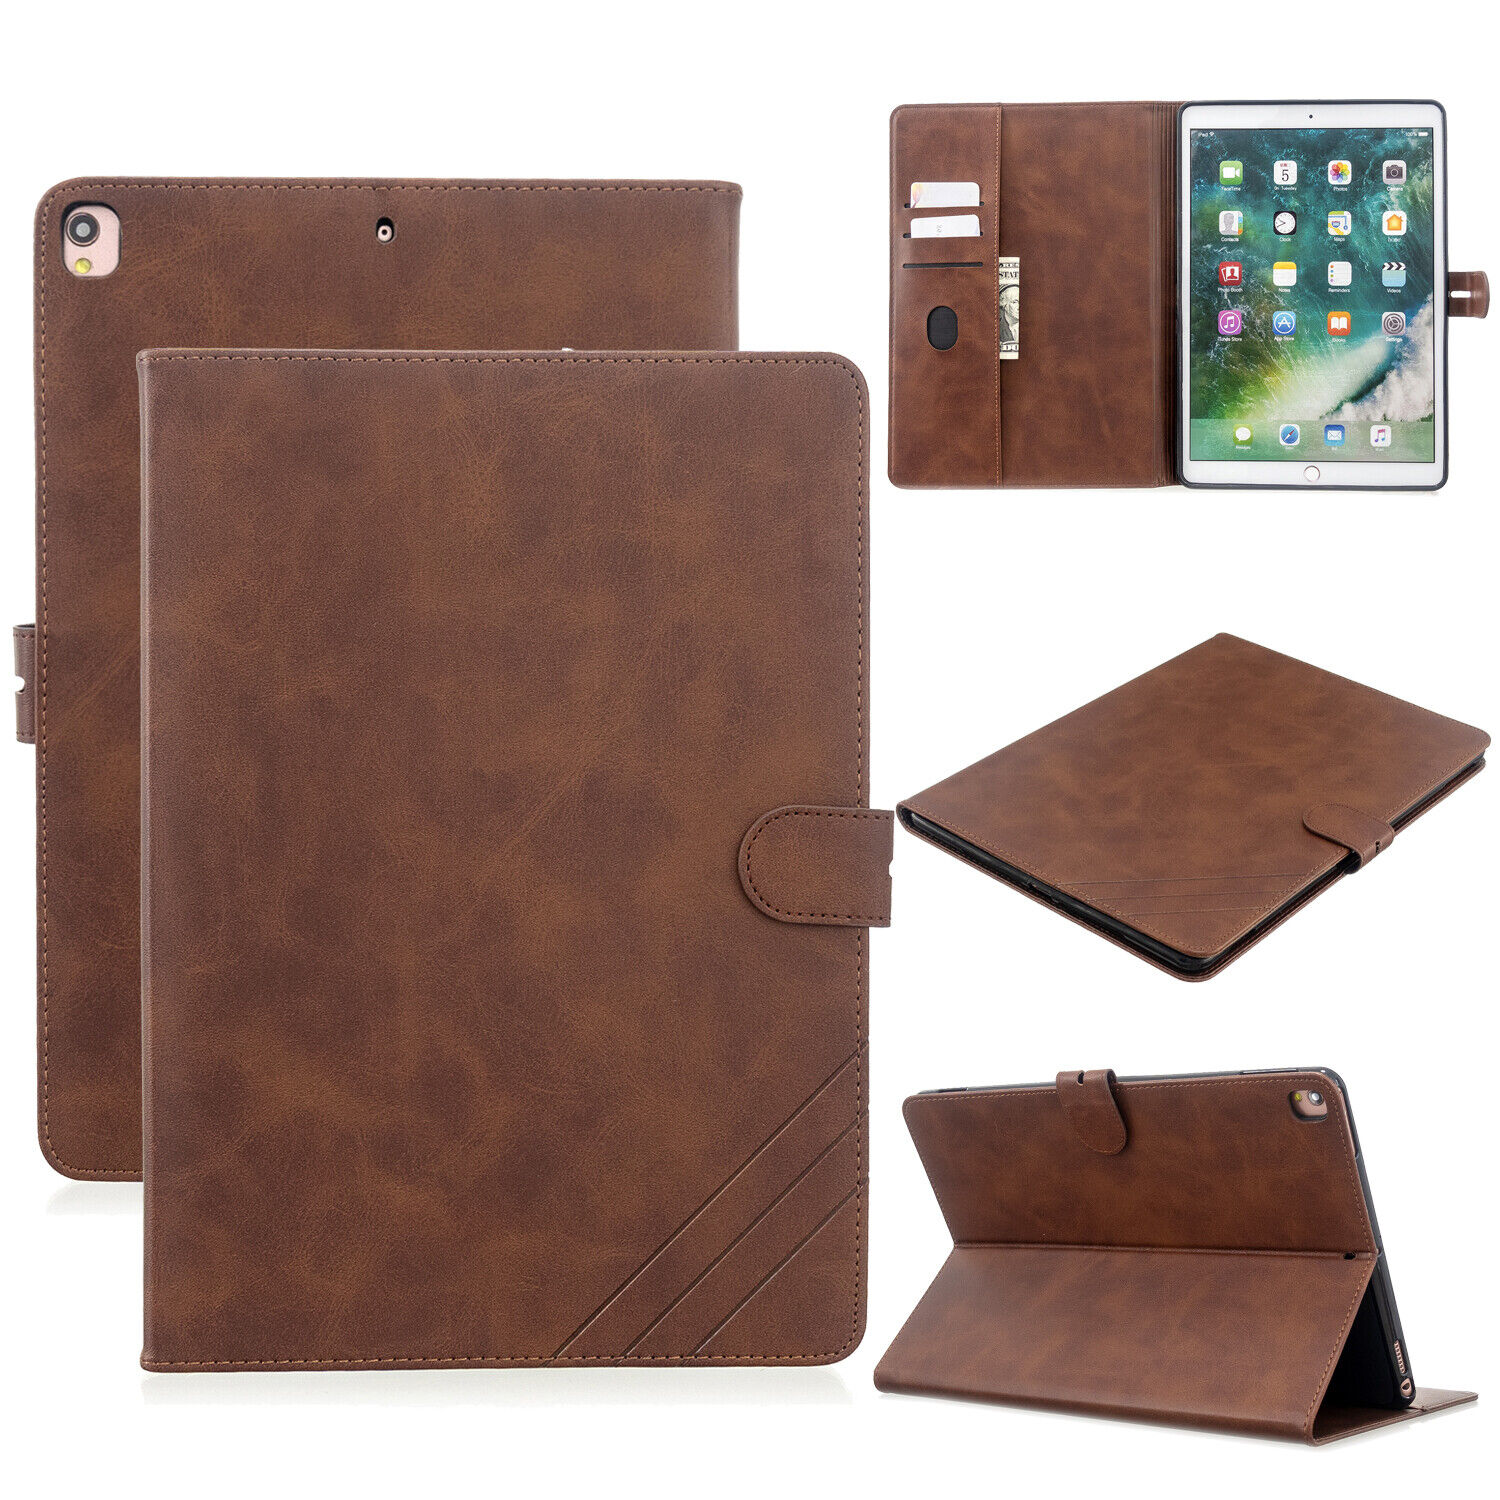 Retro Leather Stand Smart Case Cover For iPad 10.2